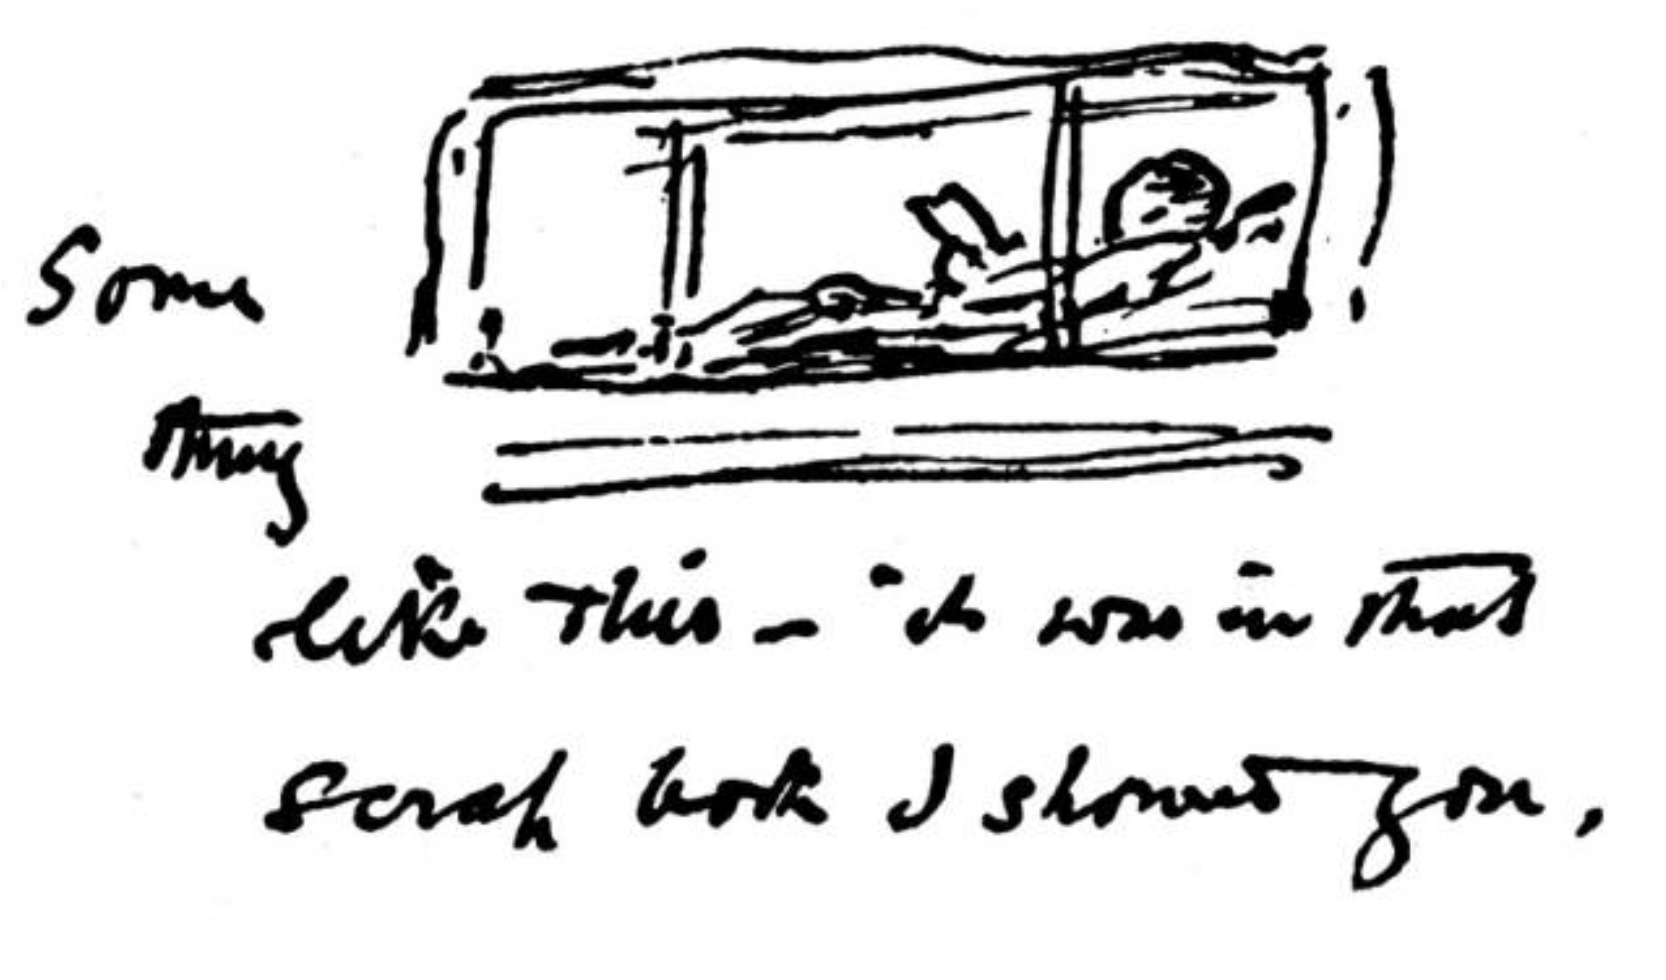 Keats, reading on board the Maria Crowther, by Arthur Severn, based on Joseph
        Severnâ€™s lost drawing, reproduced from Caroline Spurgeonâ€™s Keatsâ€™s Shakespeare,
        p.viii.